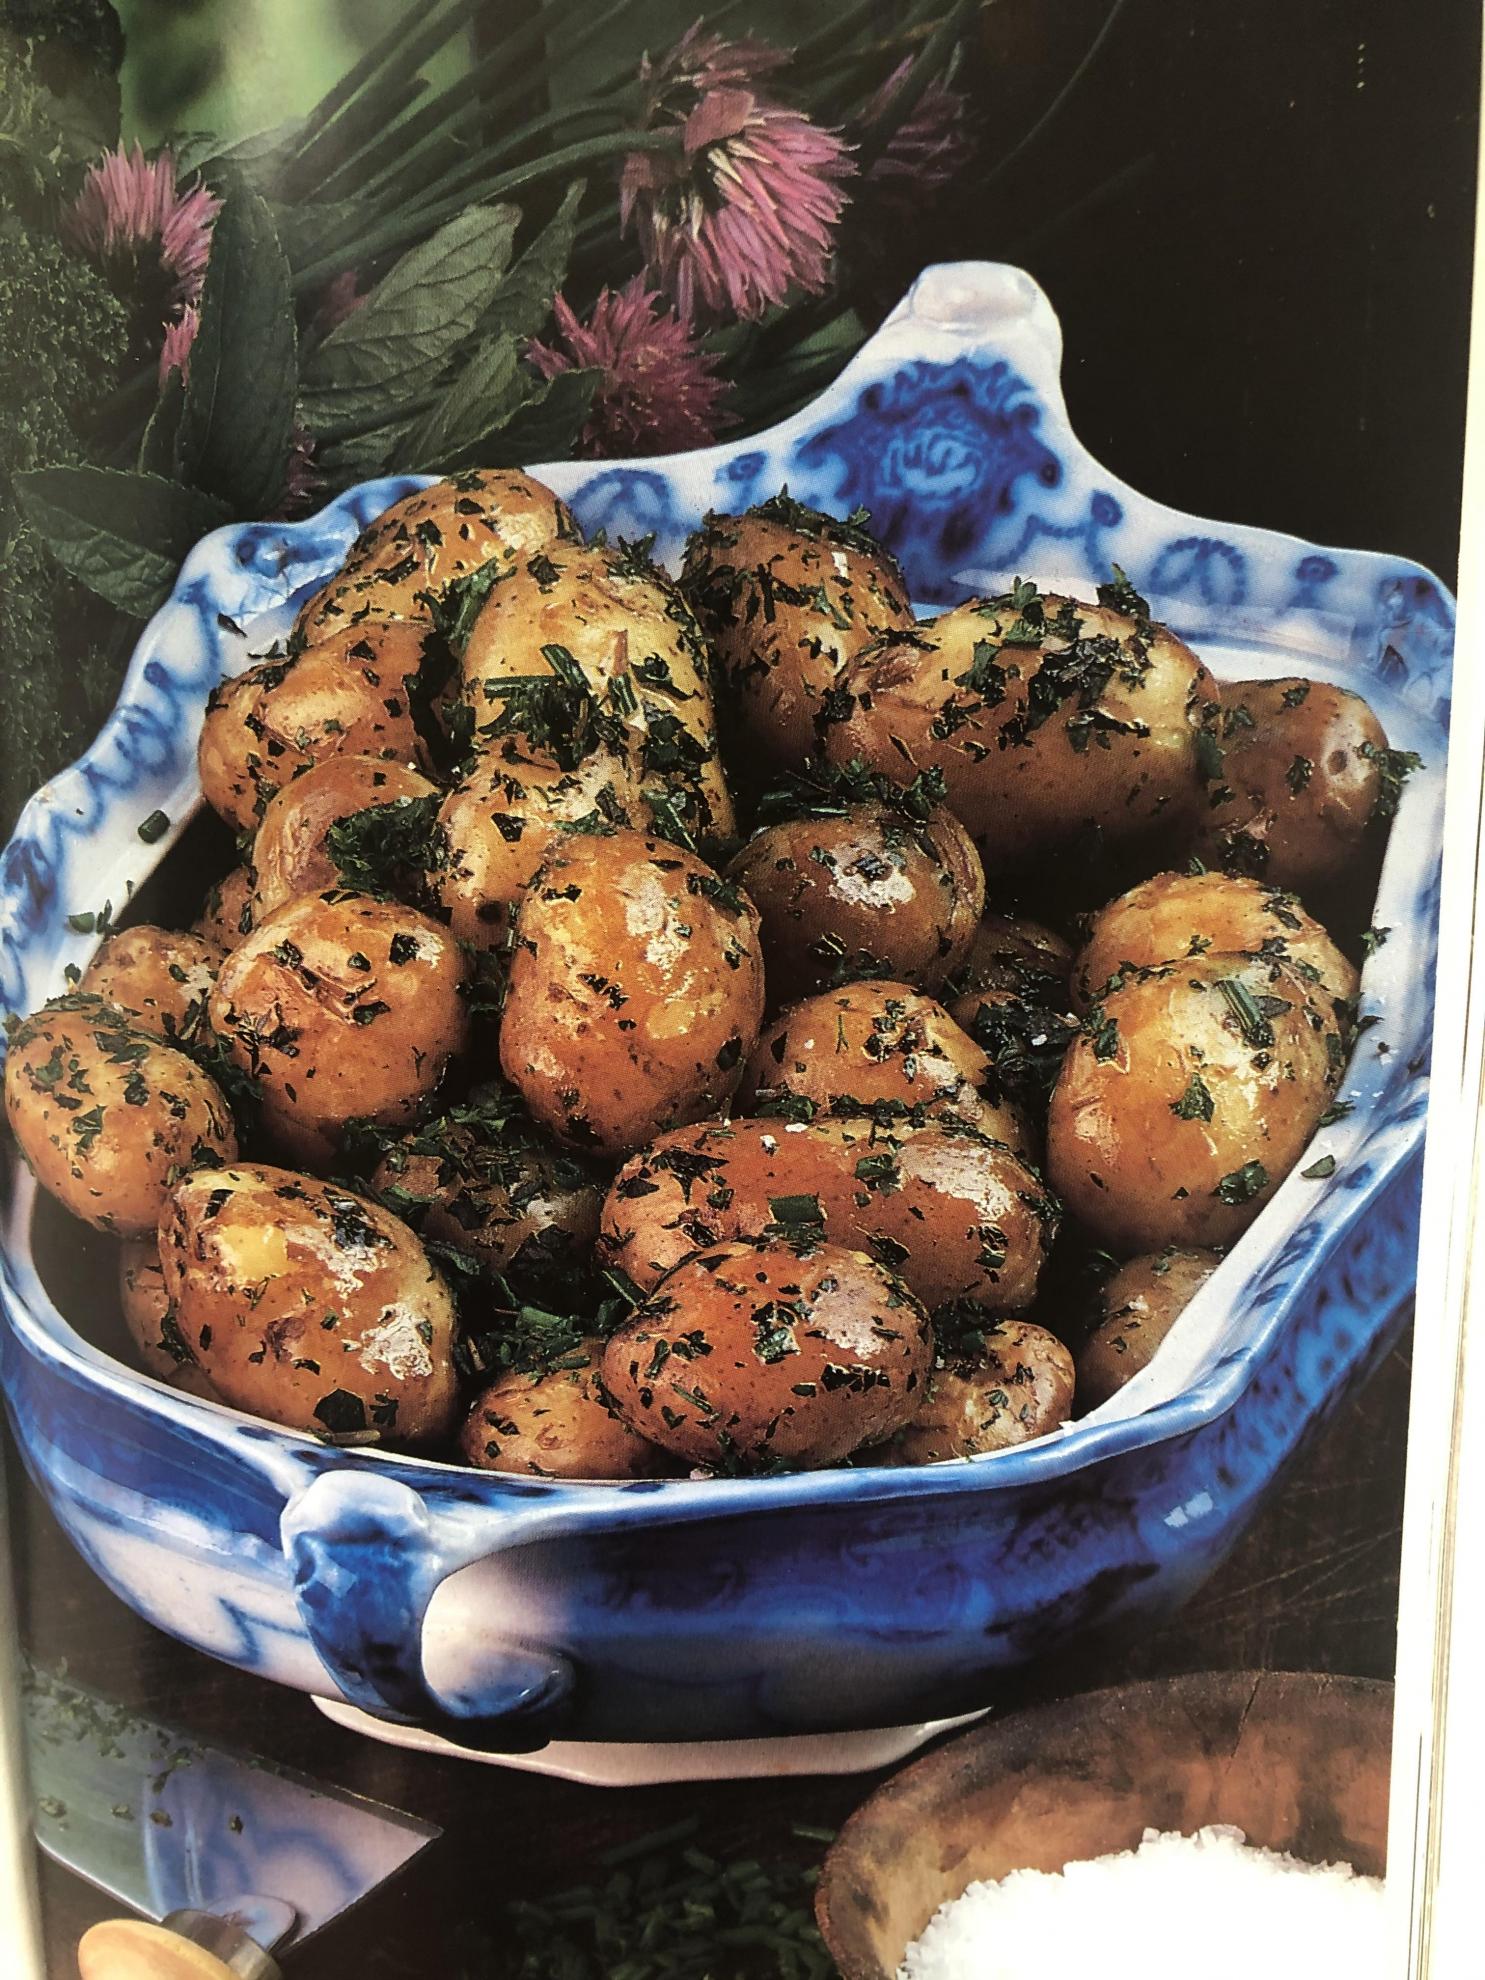 minted jersey royals